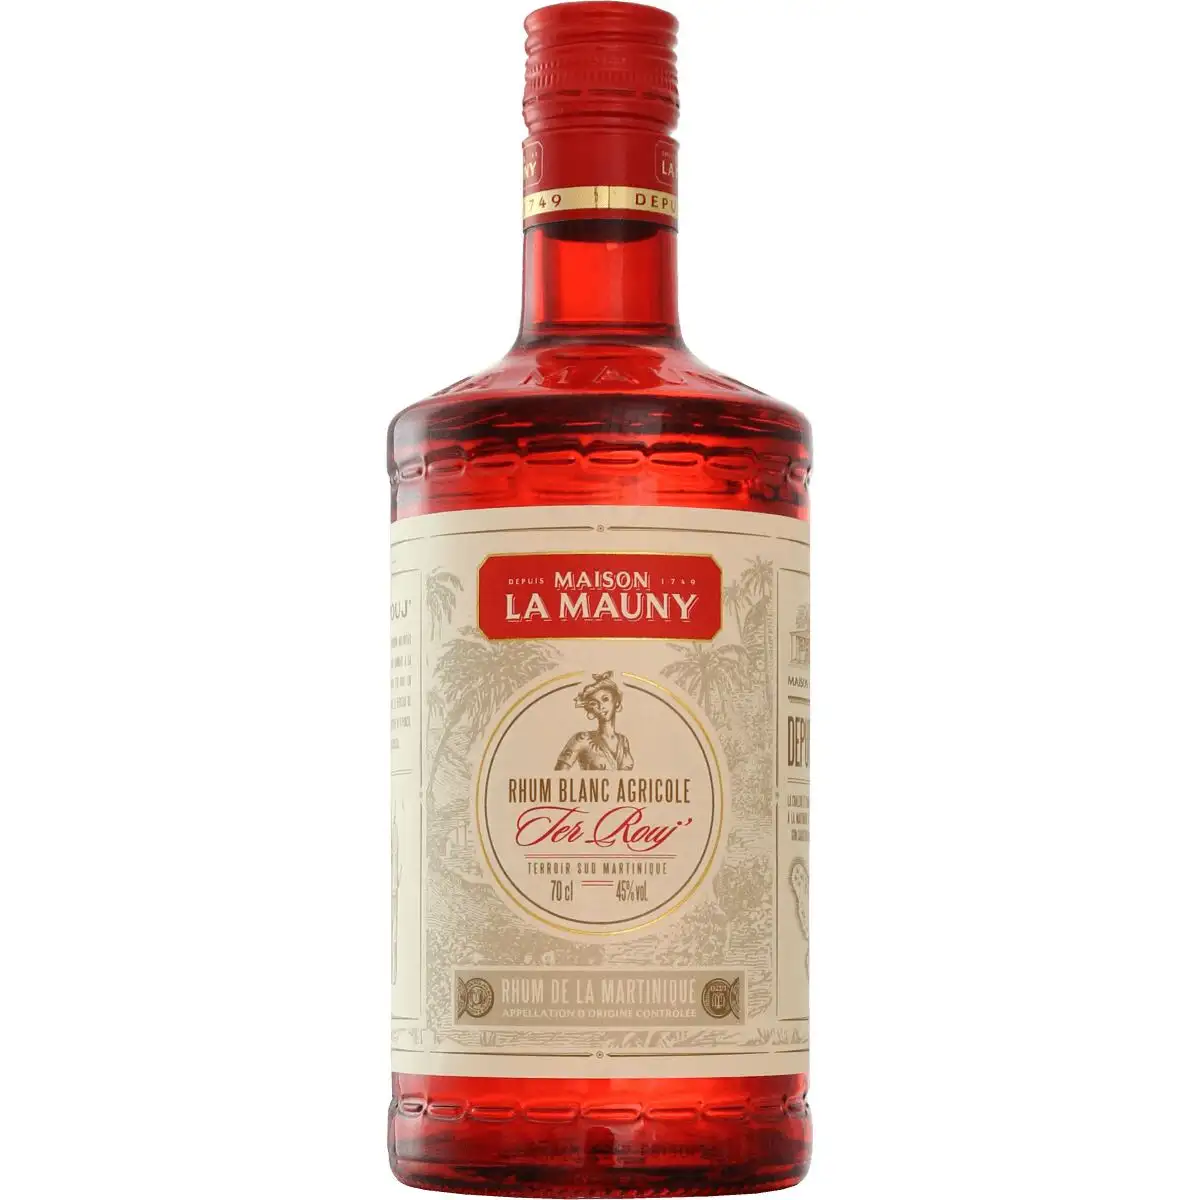 Image of the front of the bottle of the rum Ter Rouj